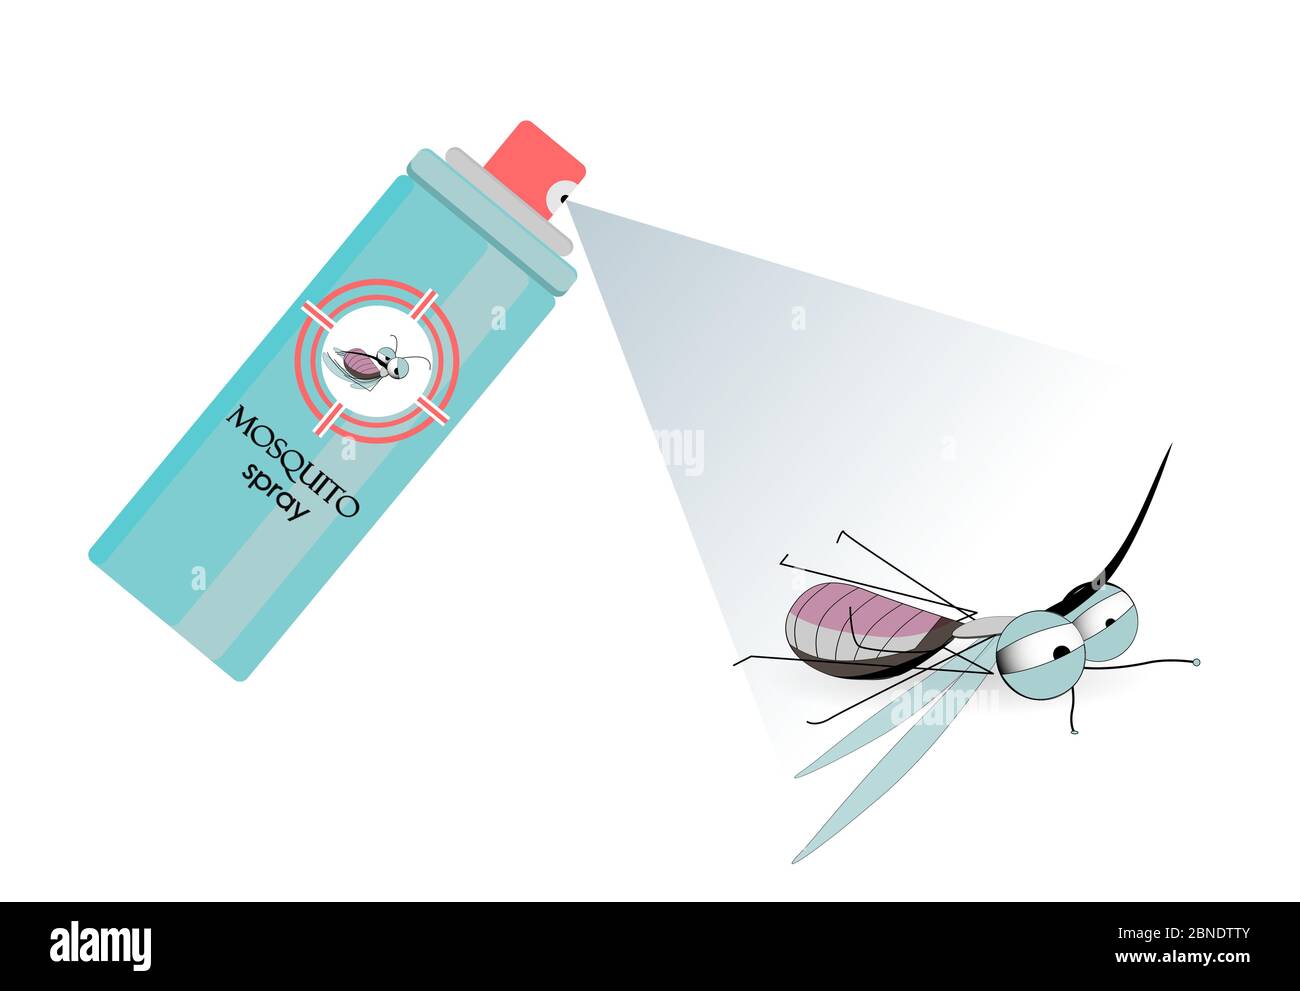 Spray kills the mosquito. Pest control. Means against parasites.Vector illustration. Stock Vector